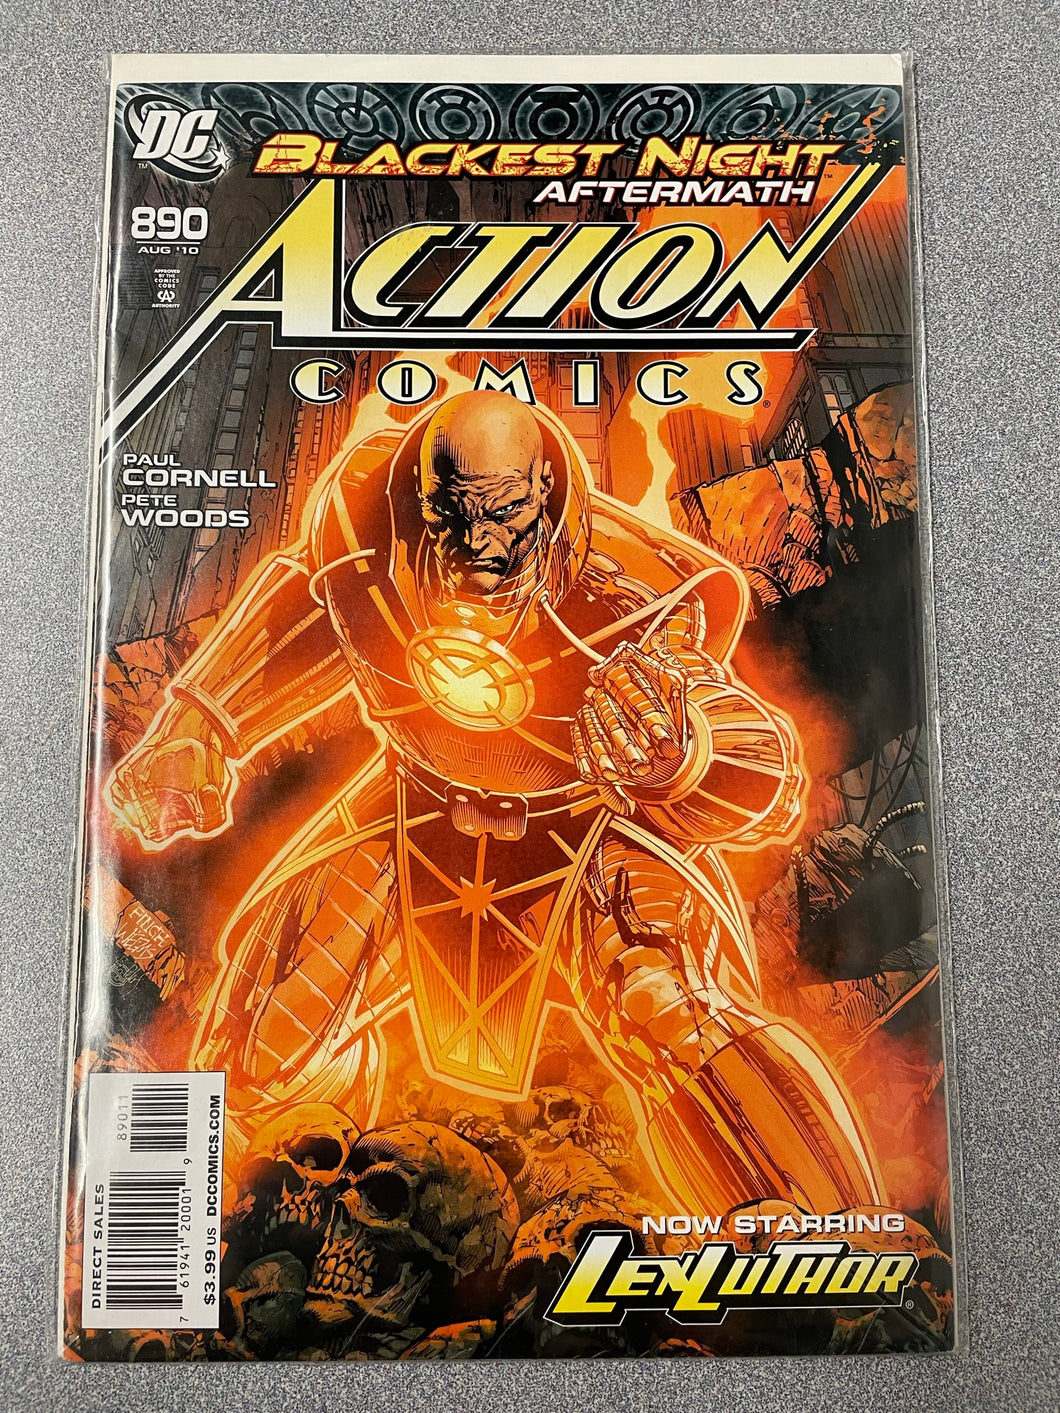 DC Comic Action Comics #890: Blackest Night Aftermath, Cornell, Paul and Pete Woods [August 2010] GN 1/23